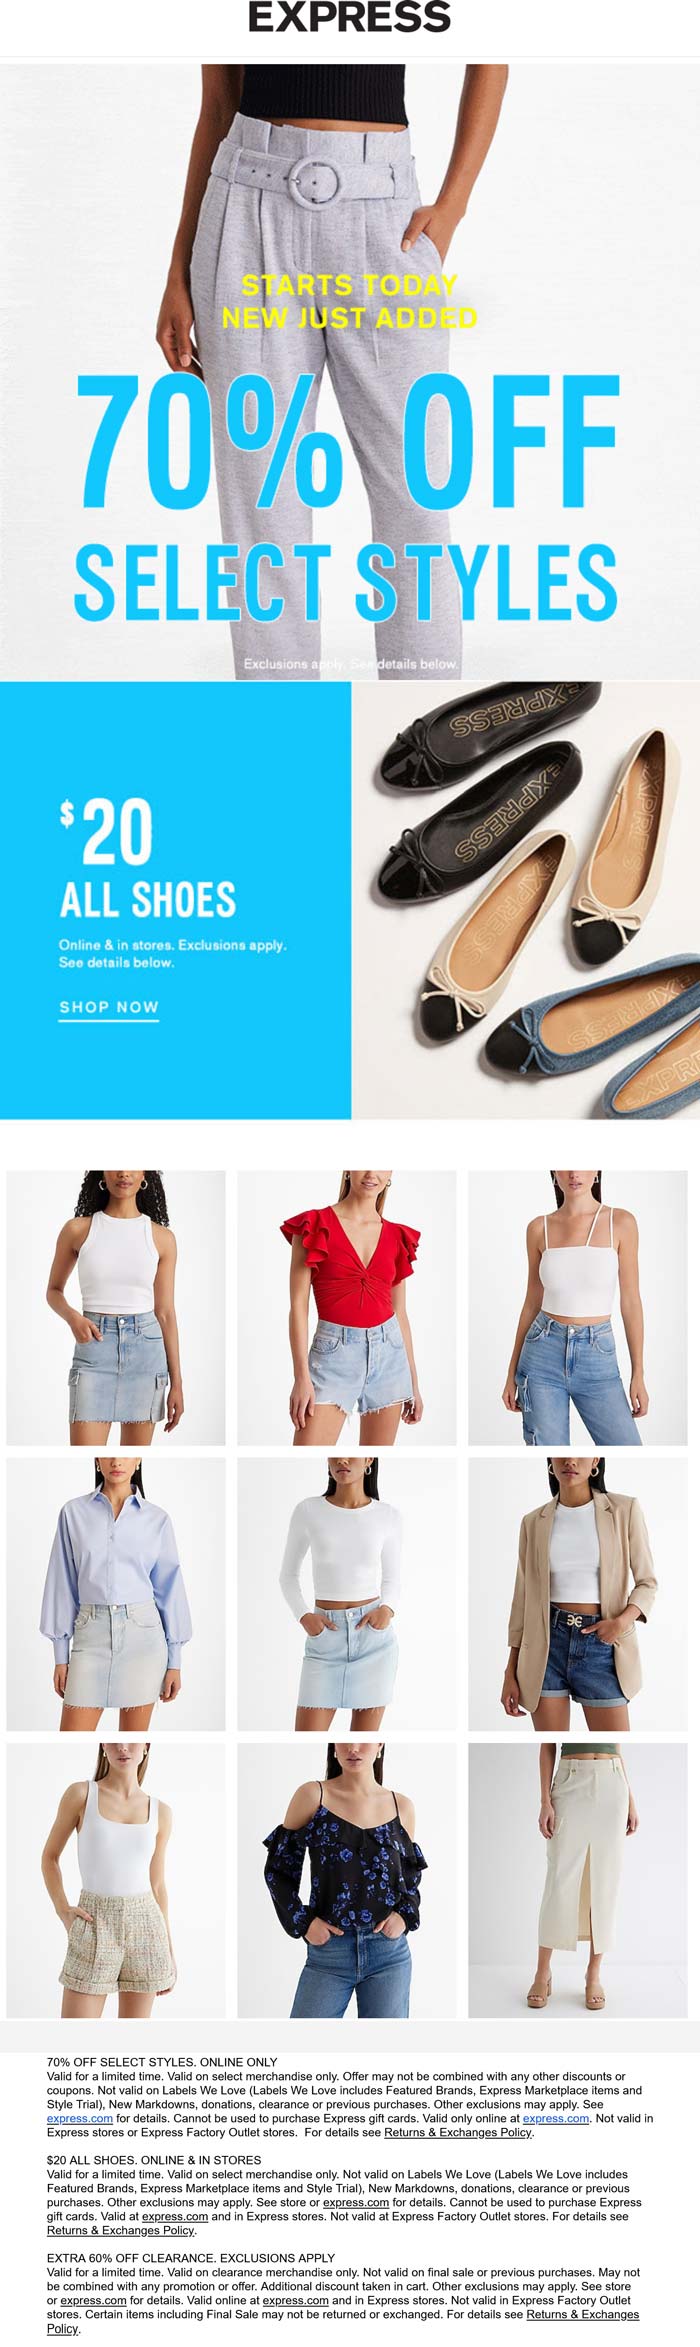 Express stores Coupon  New styles are 70% off online at Express #express 